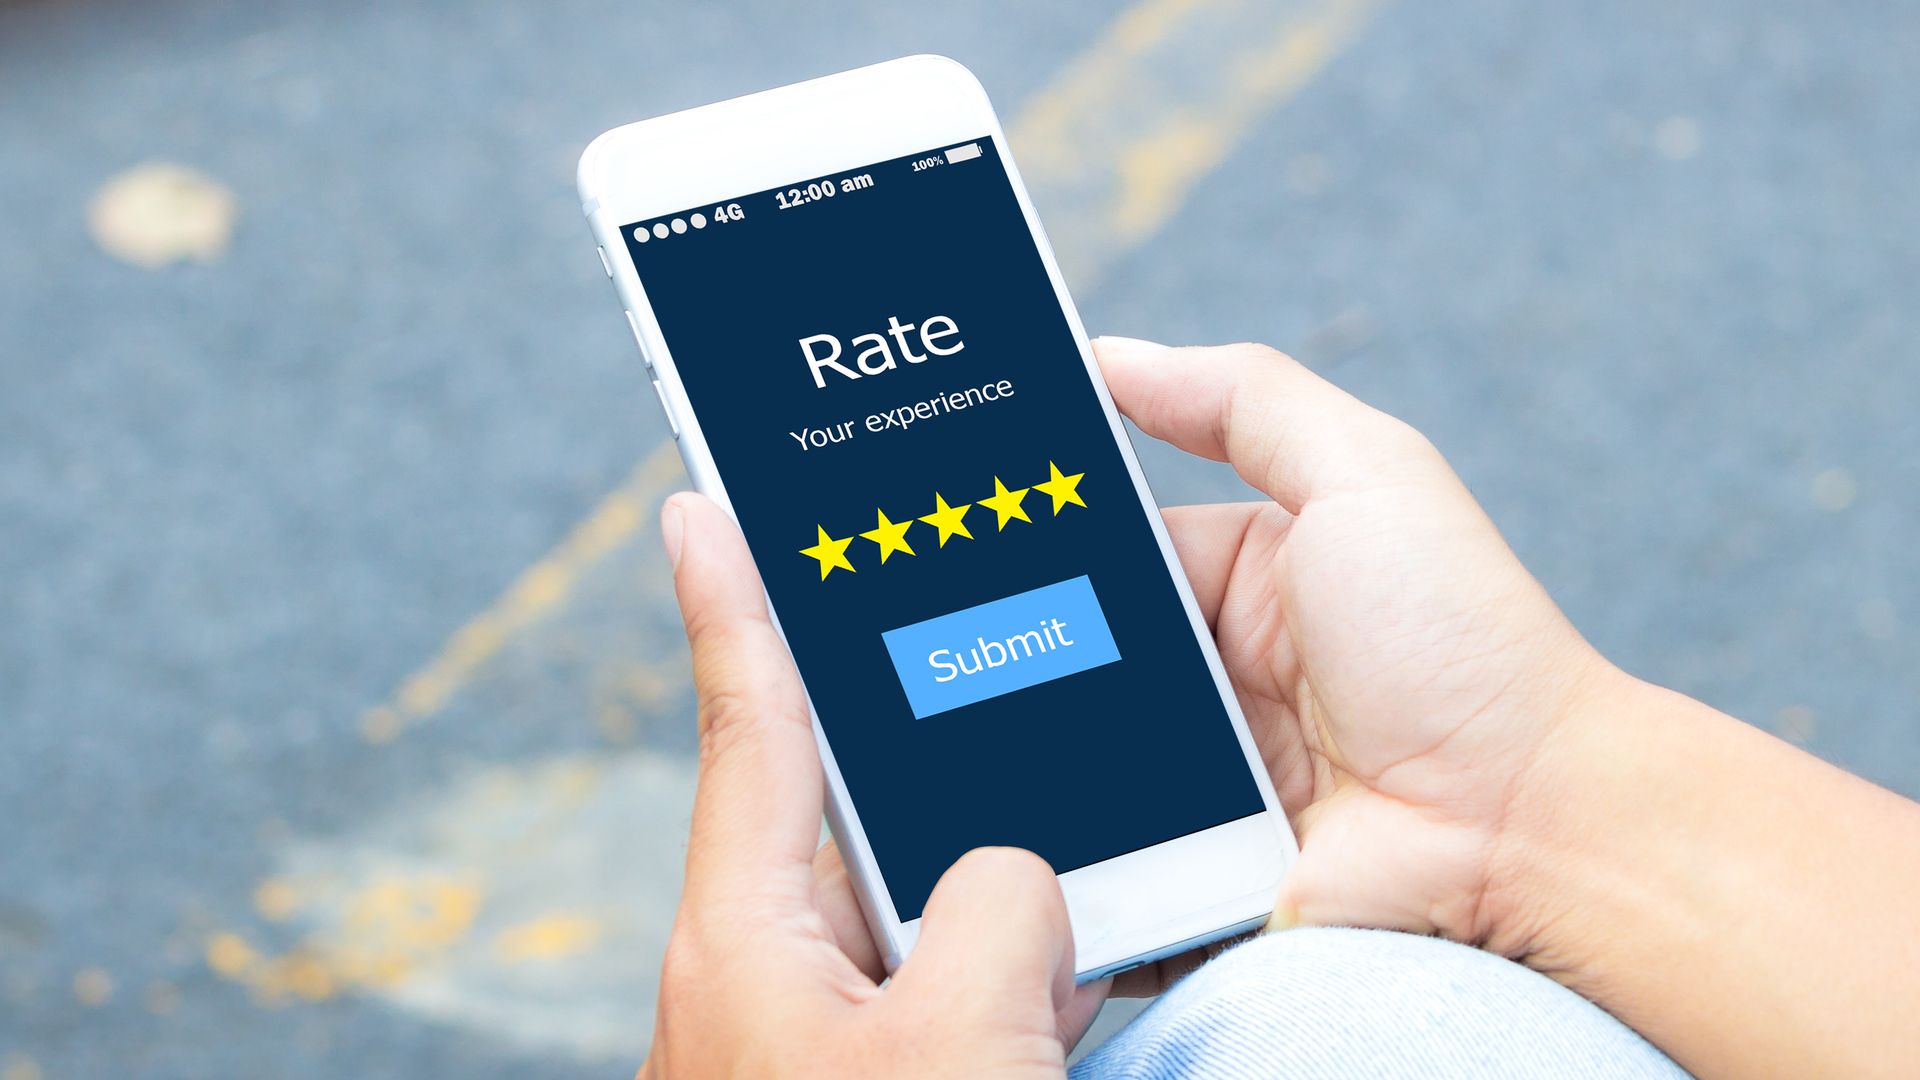 Man hands holding smart phone with &quot;rate your experience&quot; prompt open.